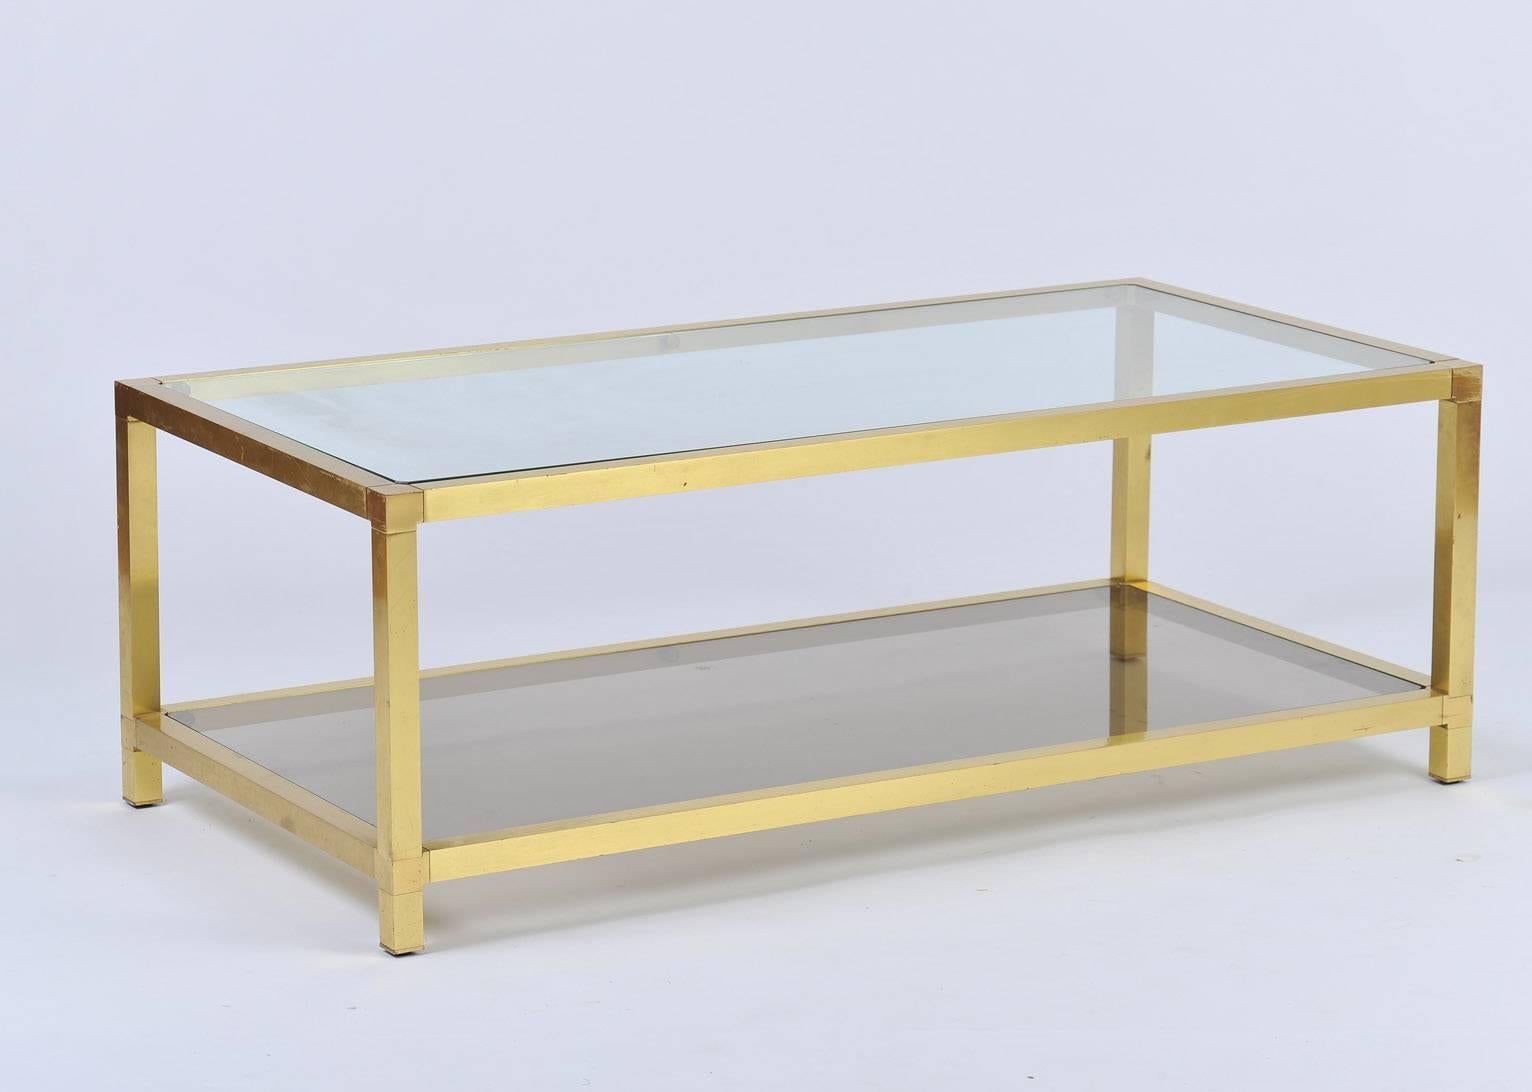 A glass top two-tiered gilt coffee table the bottom shelf of bronze mirror glass
France, circa 1970.